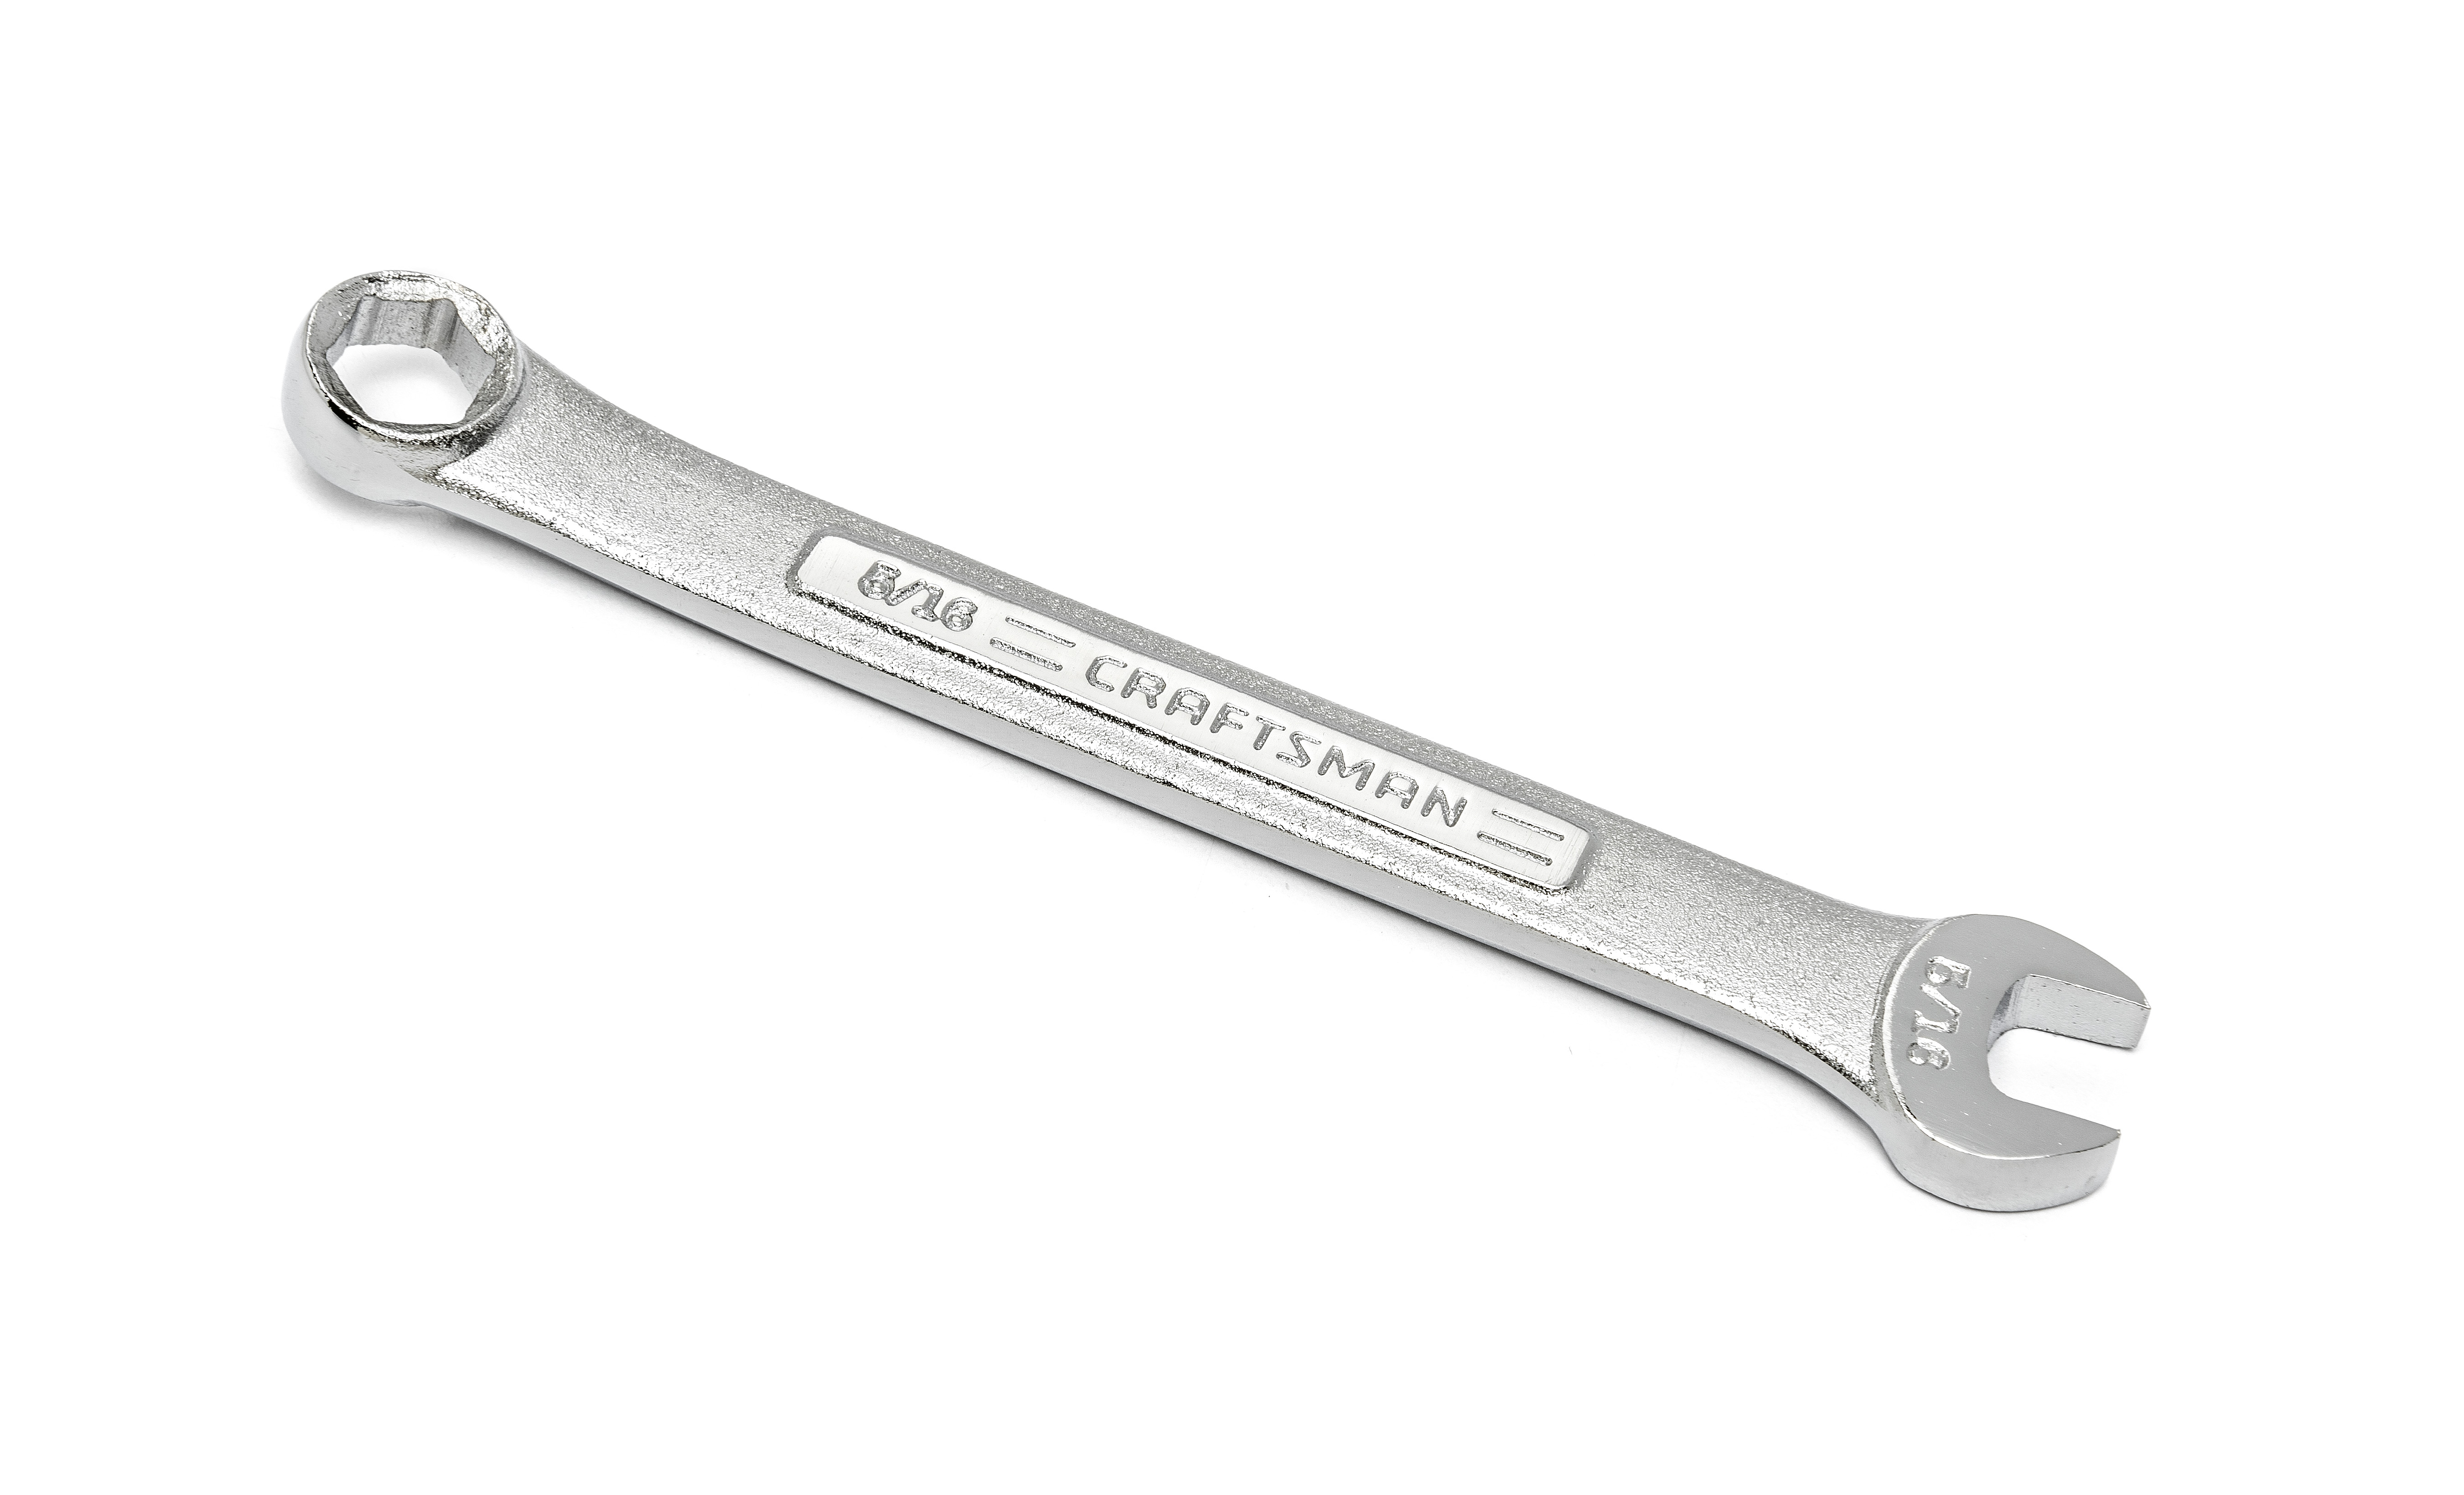 Craftsman 5/16" 6 Point Combination Wrench